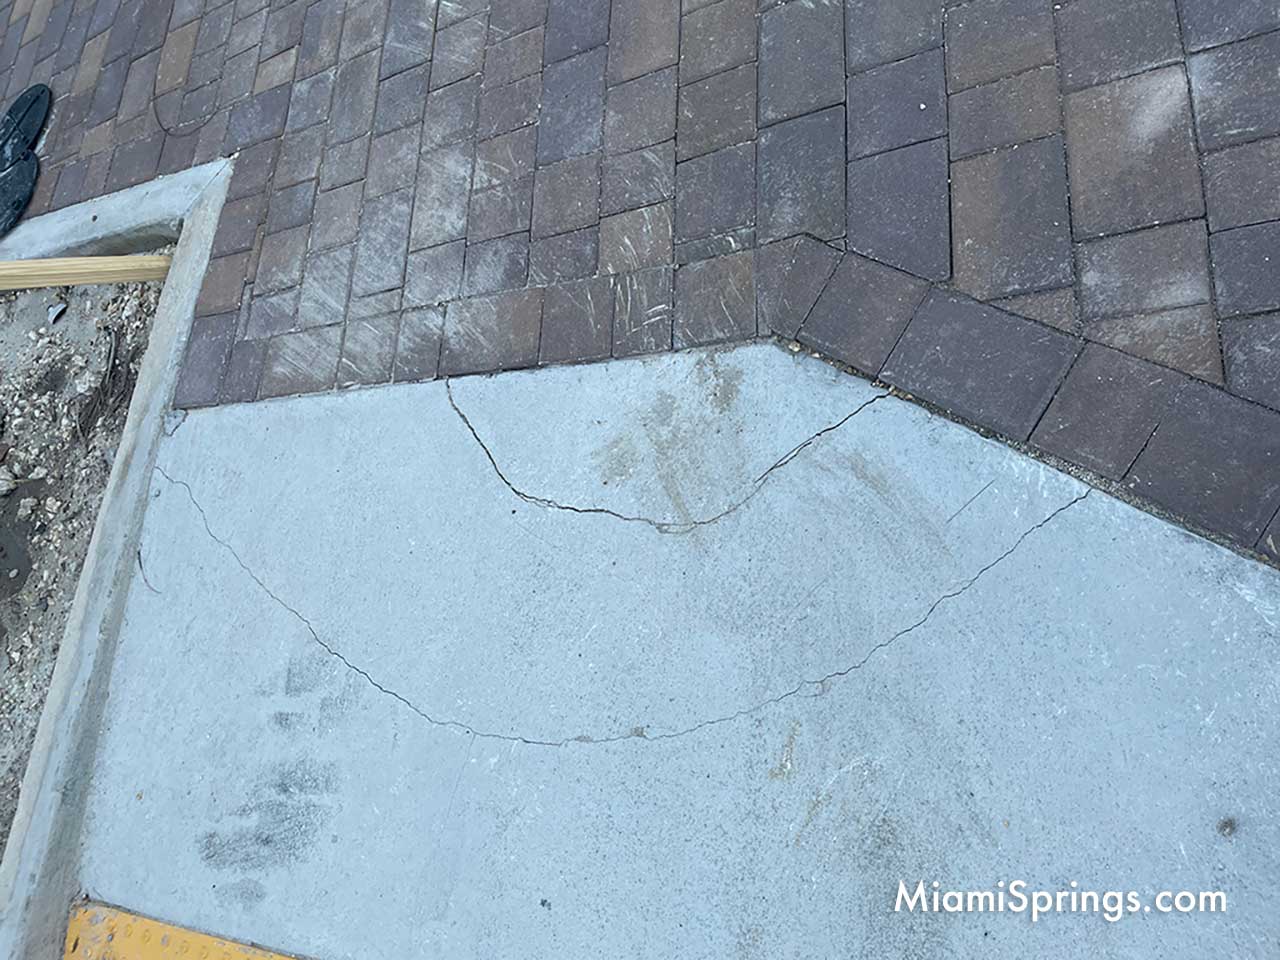 Cracked concrete sidewalk at the Miami Springs Town Center located at One Curtiss Parkway, Miami Springs, Florida (Photo Credit: MiamiSprings.com)